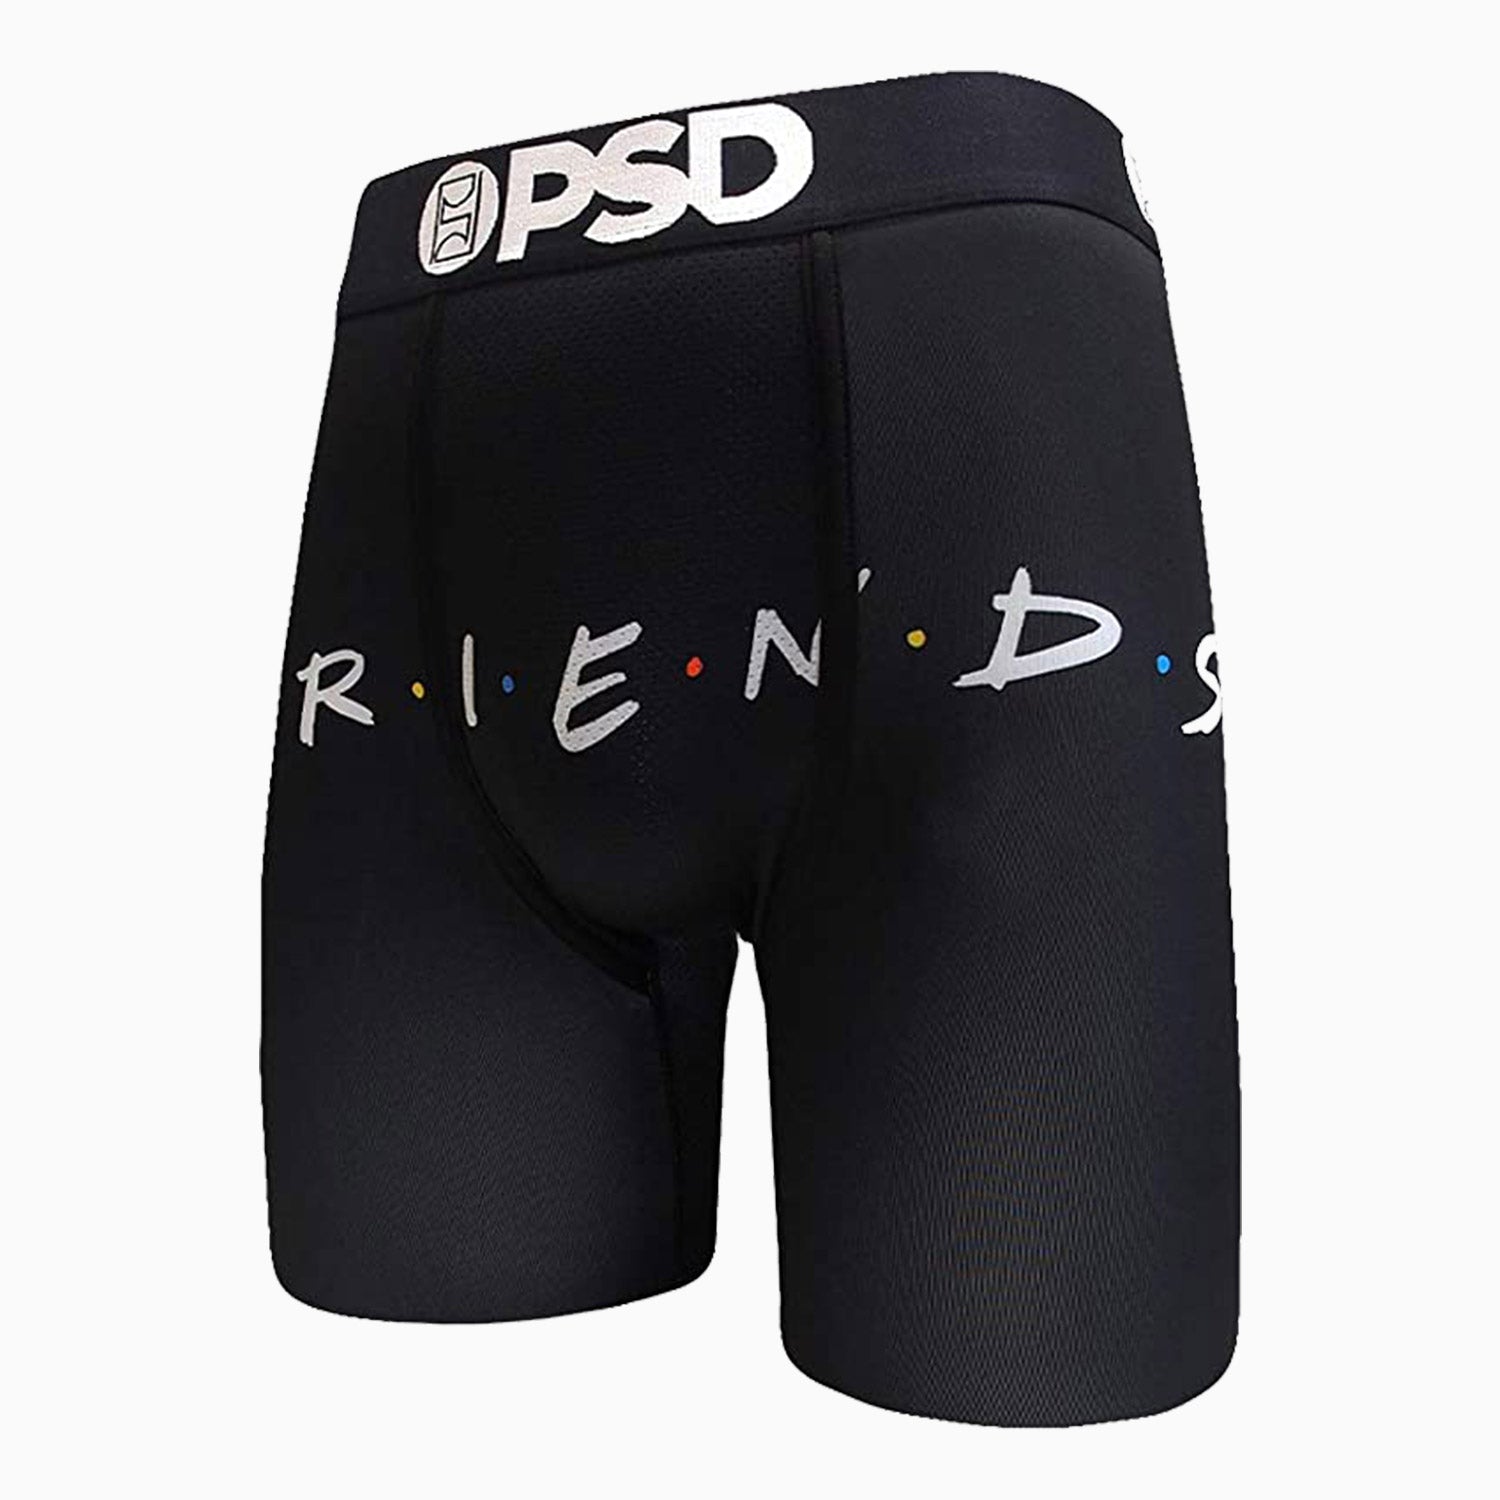 PSD UNDERWEAR | Men's Printed H Friends Boxer - Color: Black - Tops and Bottoms USA -